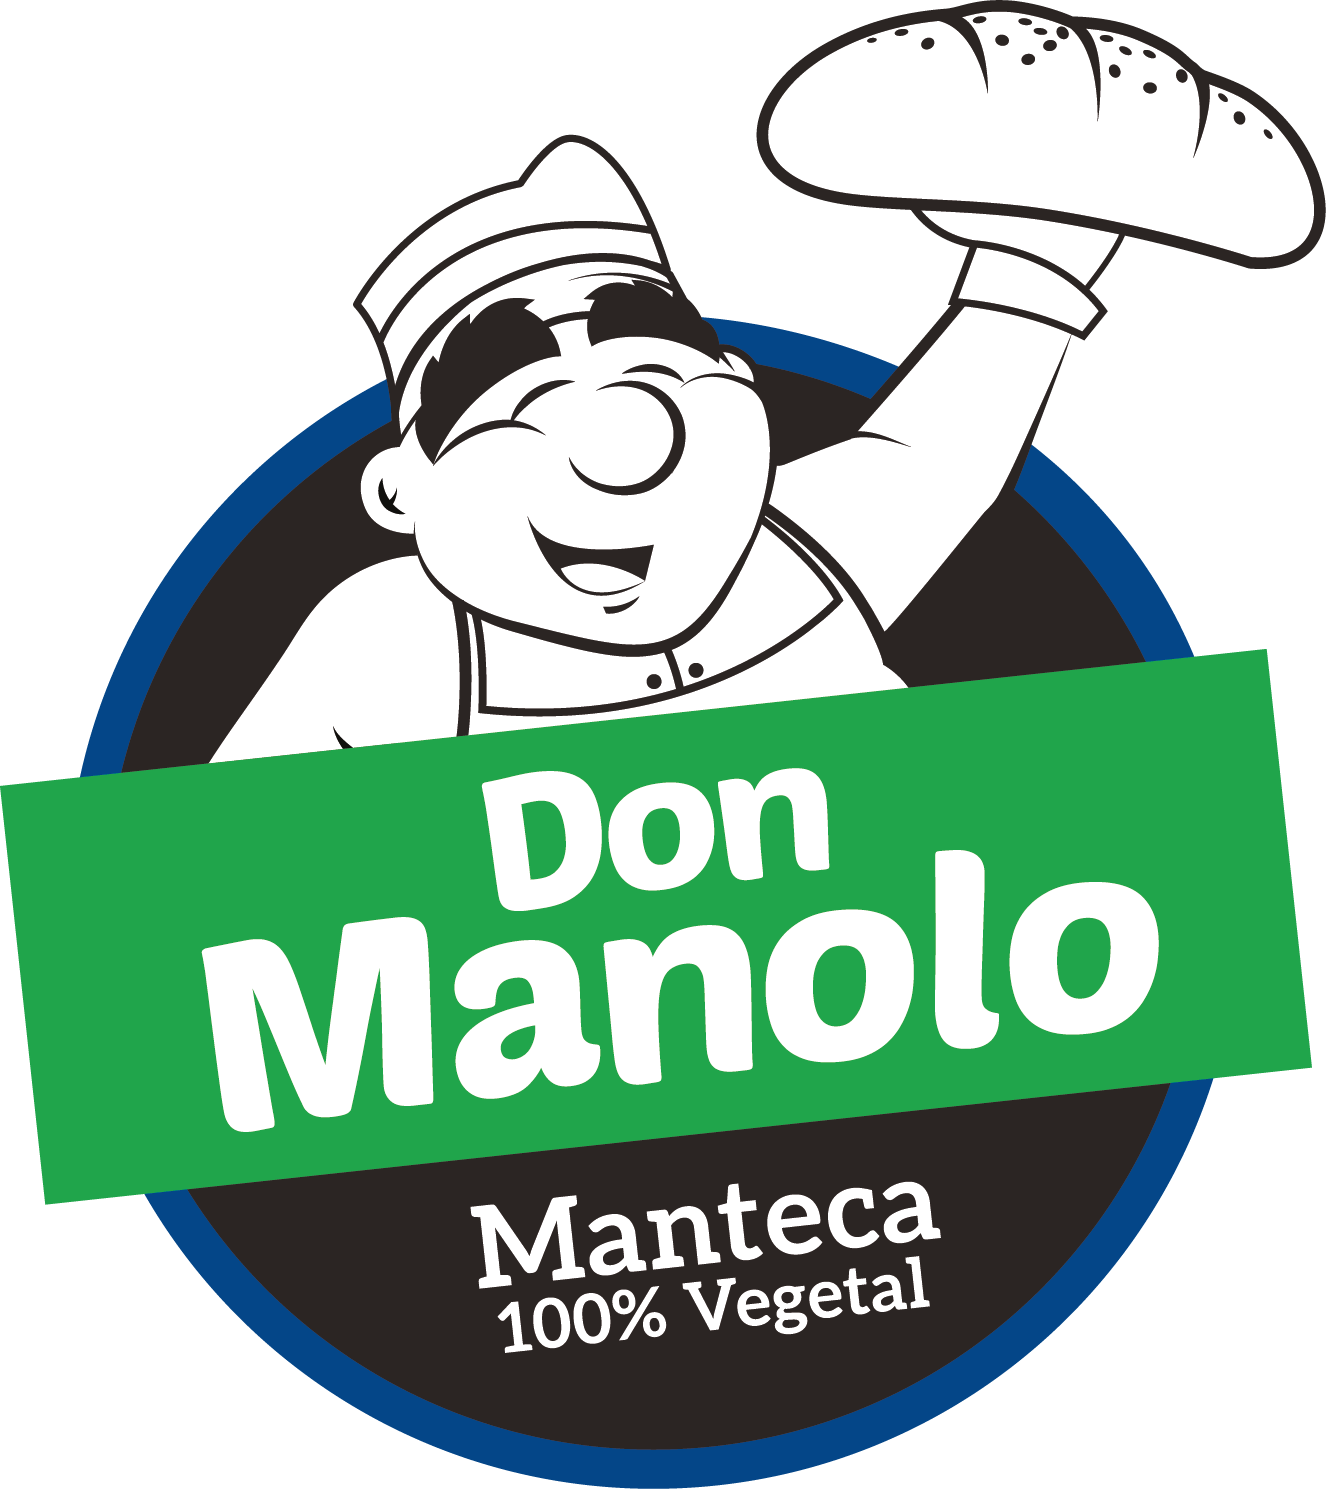 Don manolo